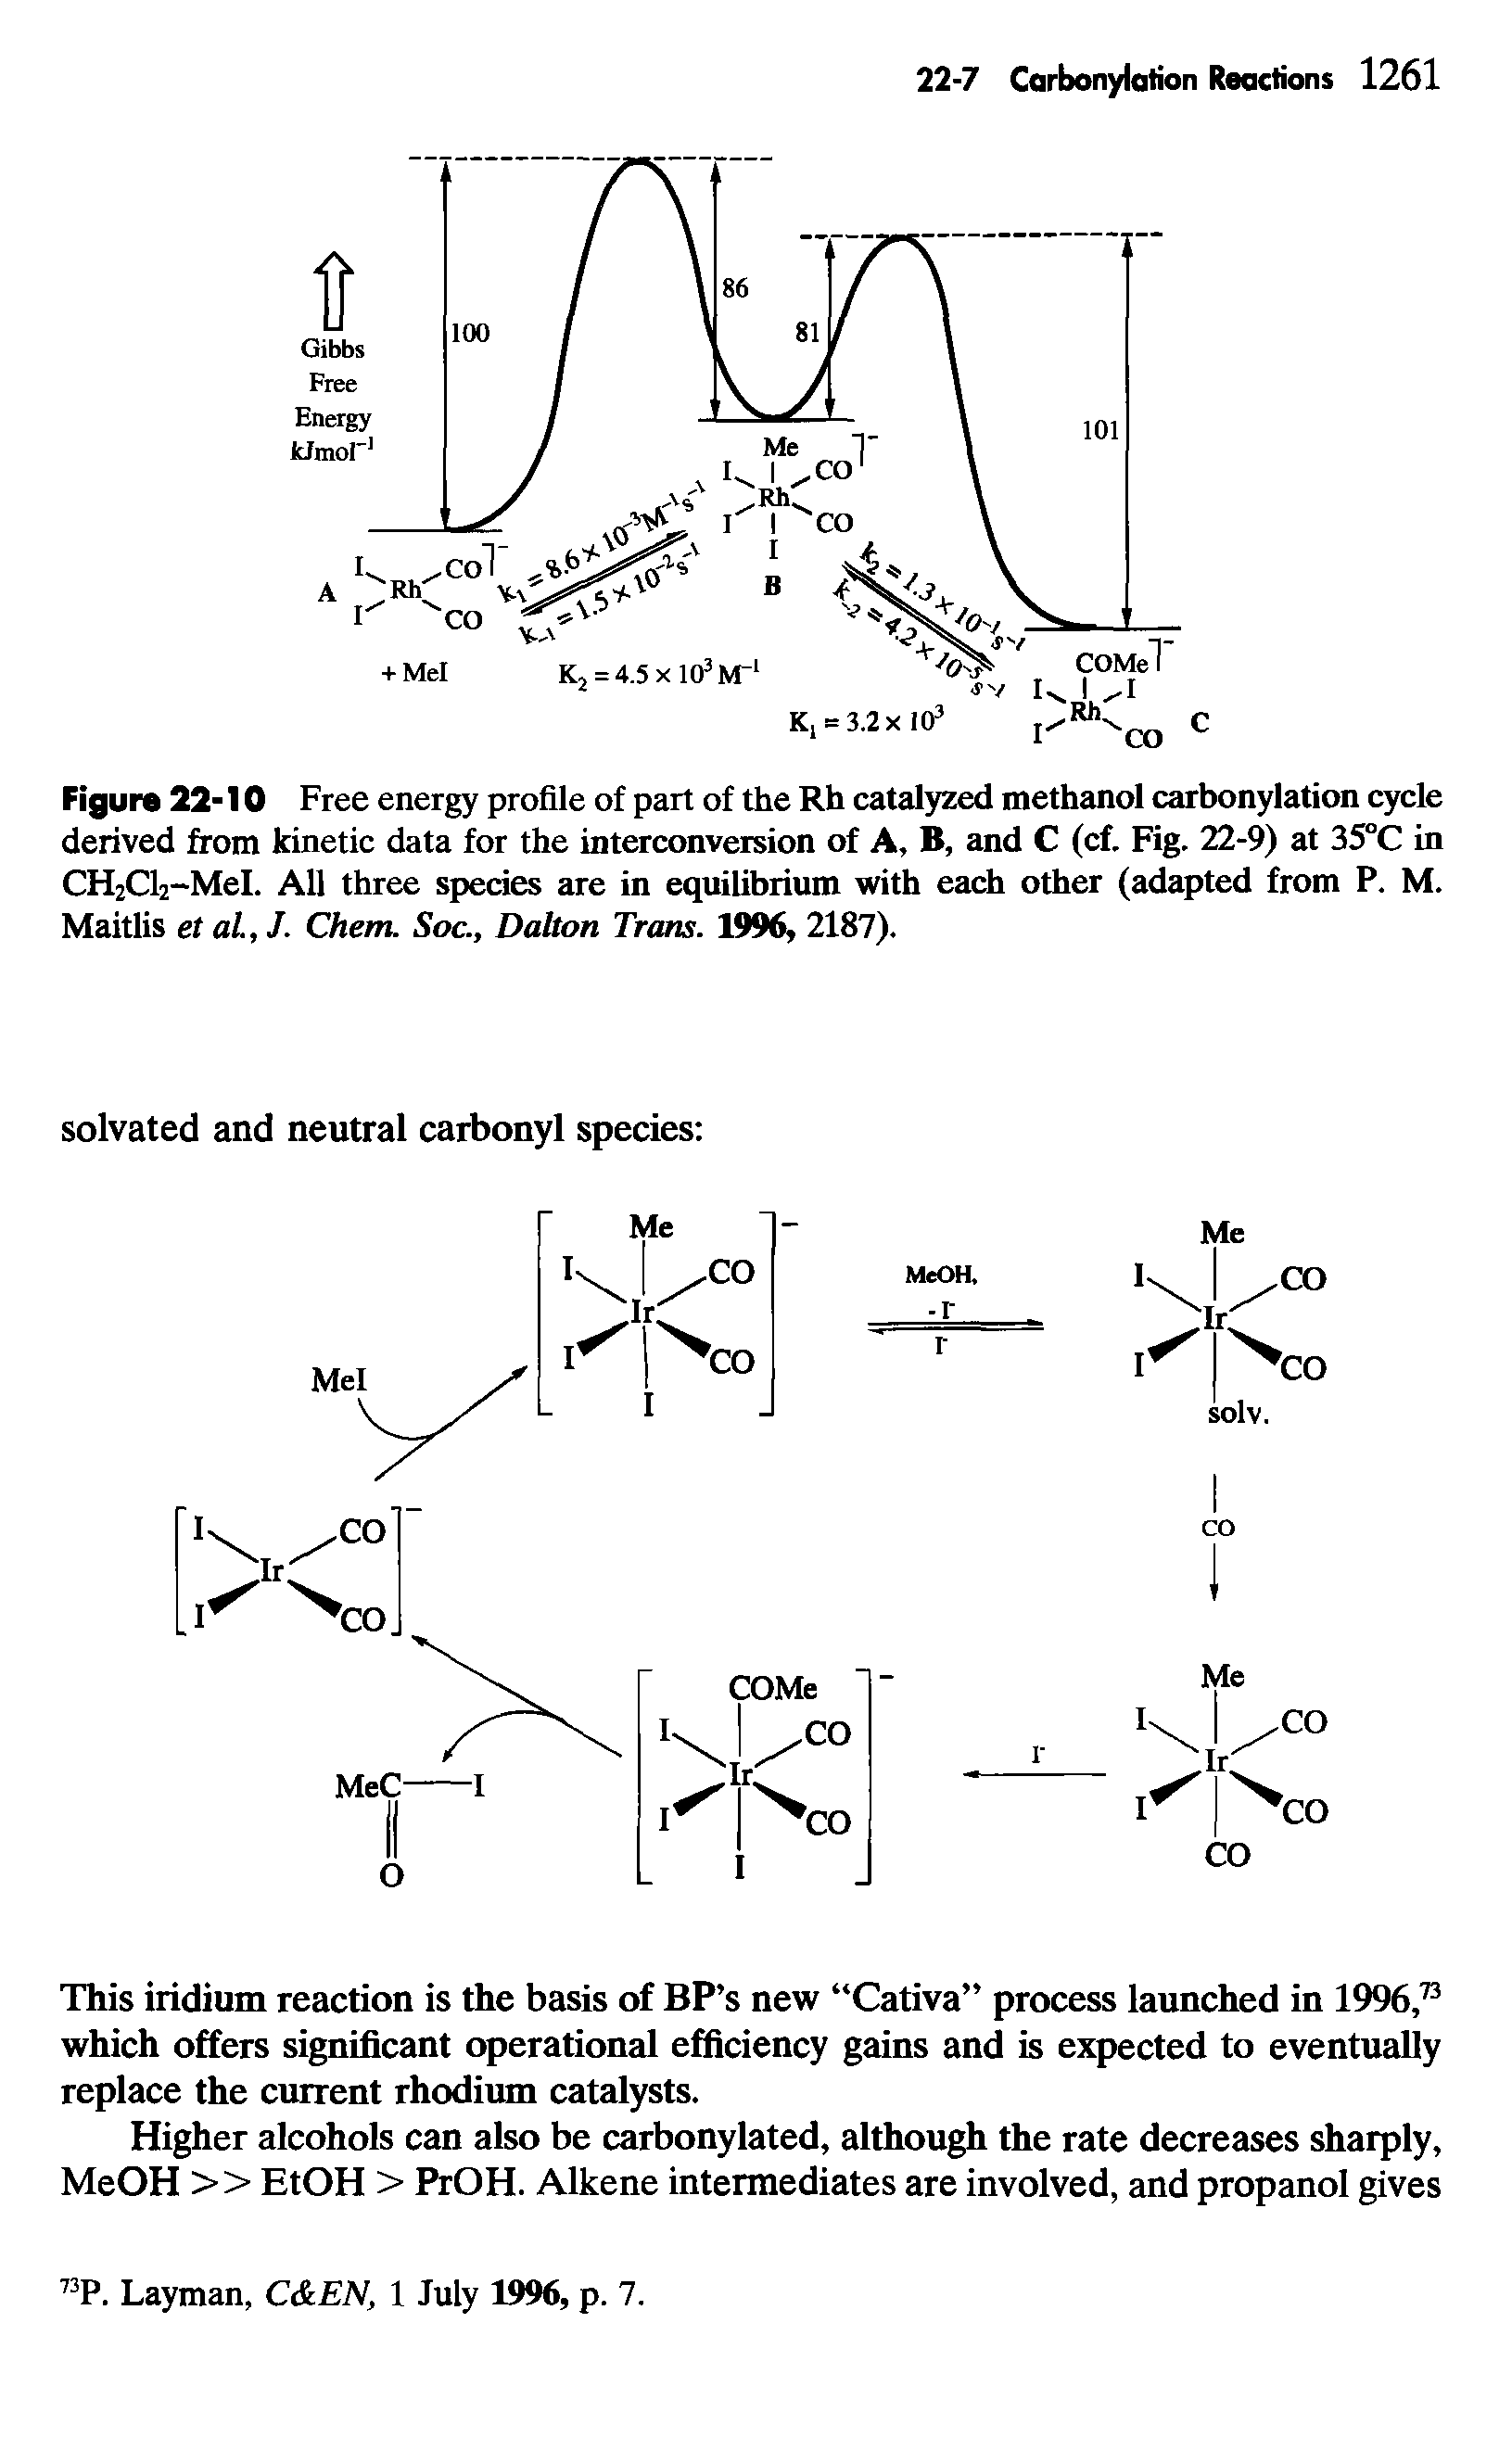 Figure 22-10 Free energy profile of part of the Rh catalyzed methanol carbonylation cycle derived from kinetic data for the interconversion of A, B, and C (cf. Fig. 22-9) at 35°C in CH2Cl2-MeI. All three species are in equilibrium with each other (adapted from P. M. Maitlis et al., J. Chem. Soc., Dalton Trans. 1996, 2187).